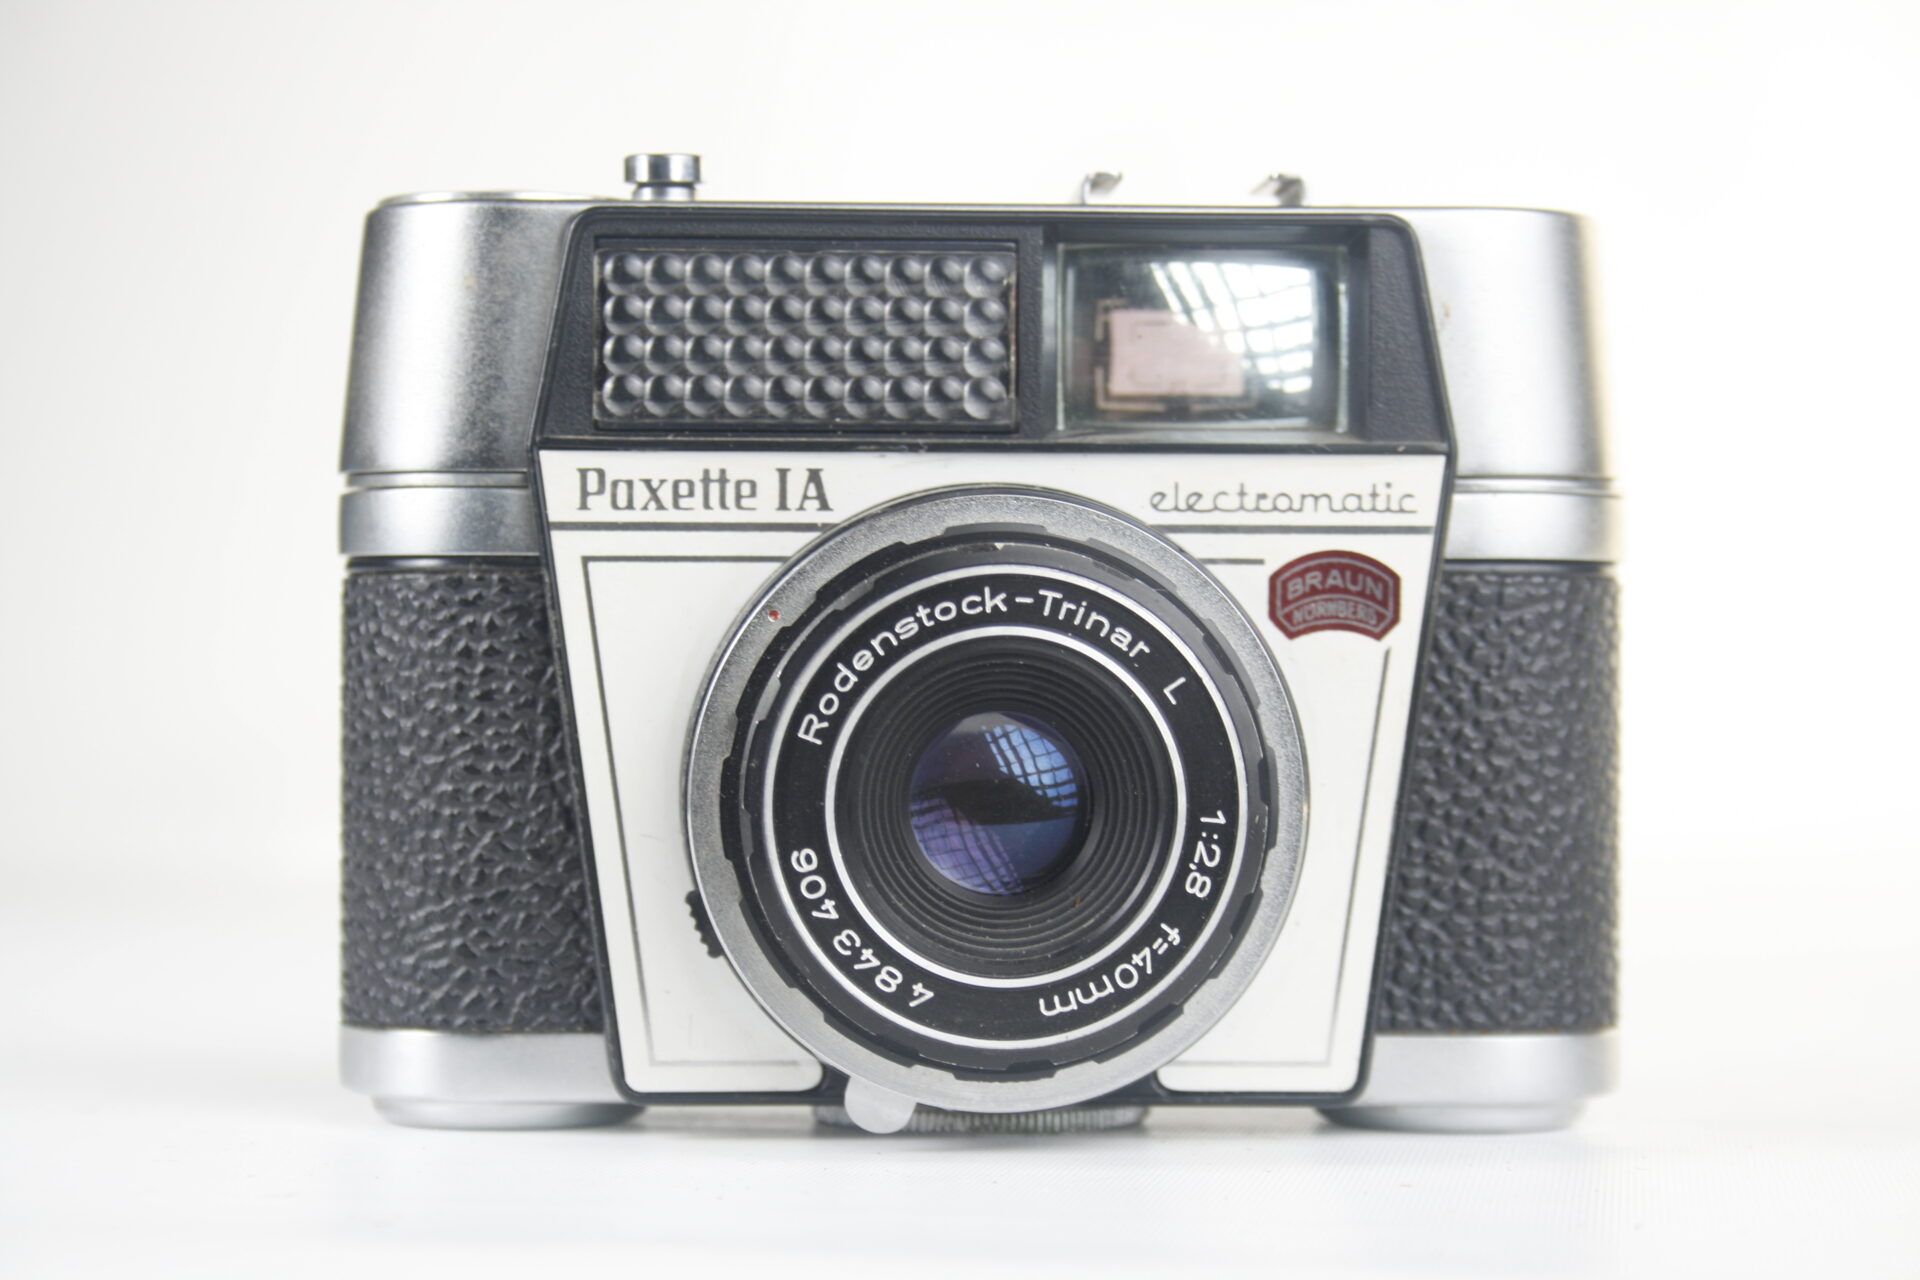 Braun Paxette 1A  electromatic. 35mm film. 1959. Duitsland.